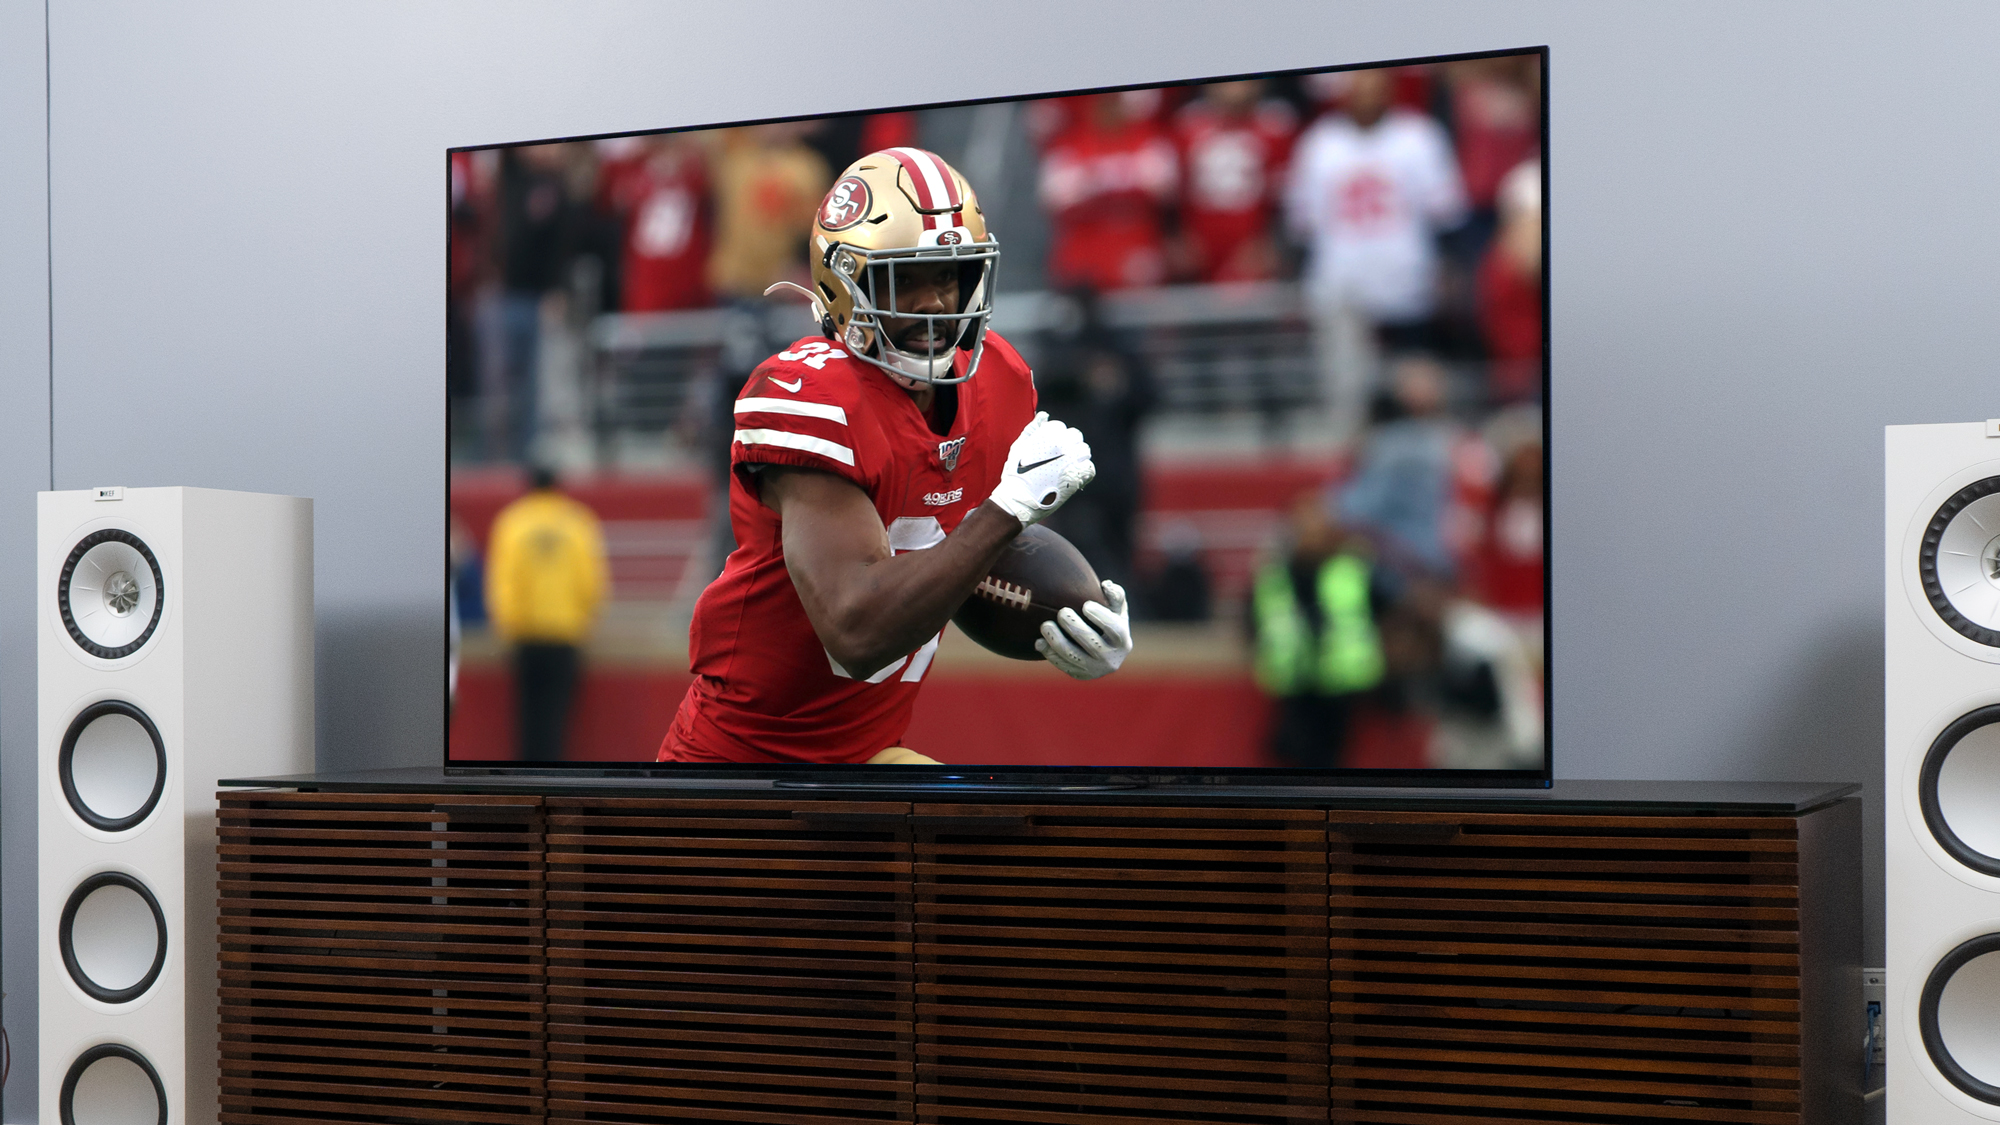 Verizon to Show Super Bowl 2020 In 4K – The TV Answer Man!